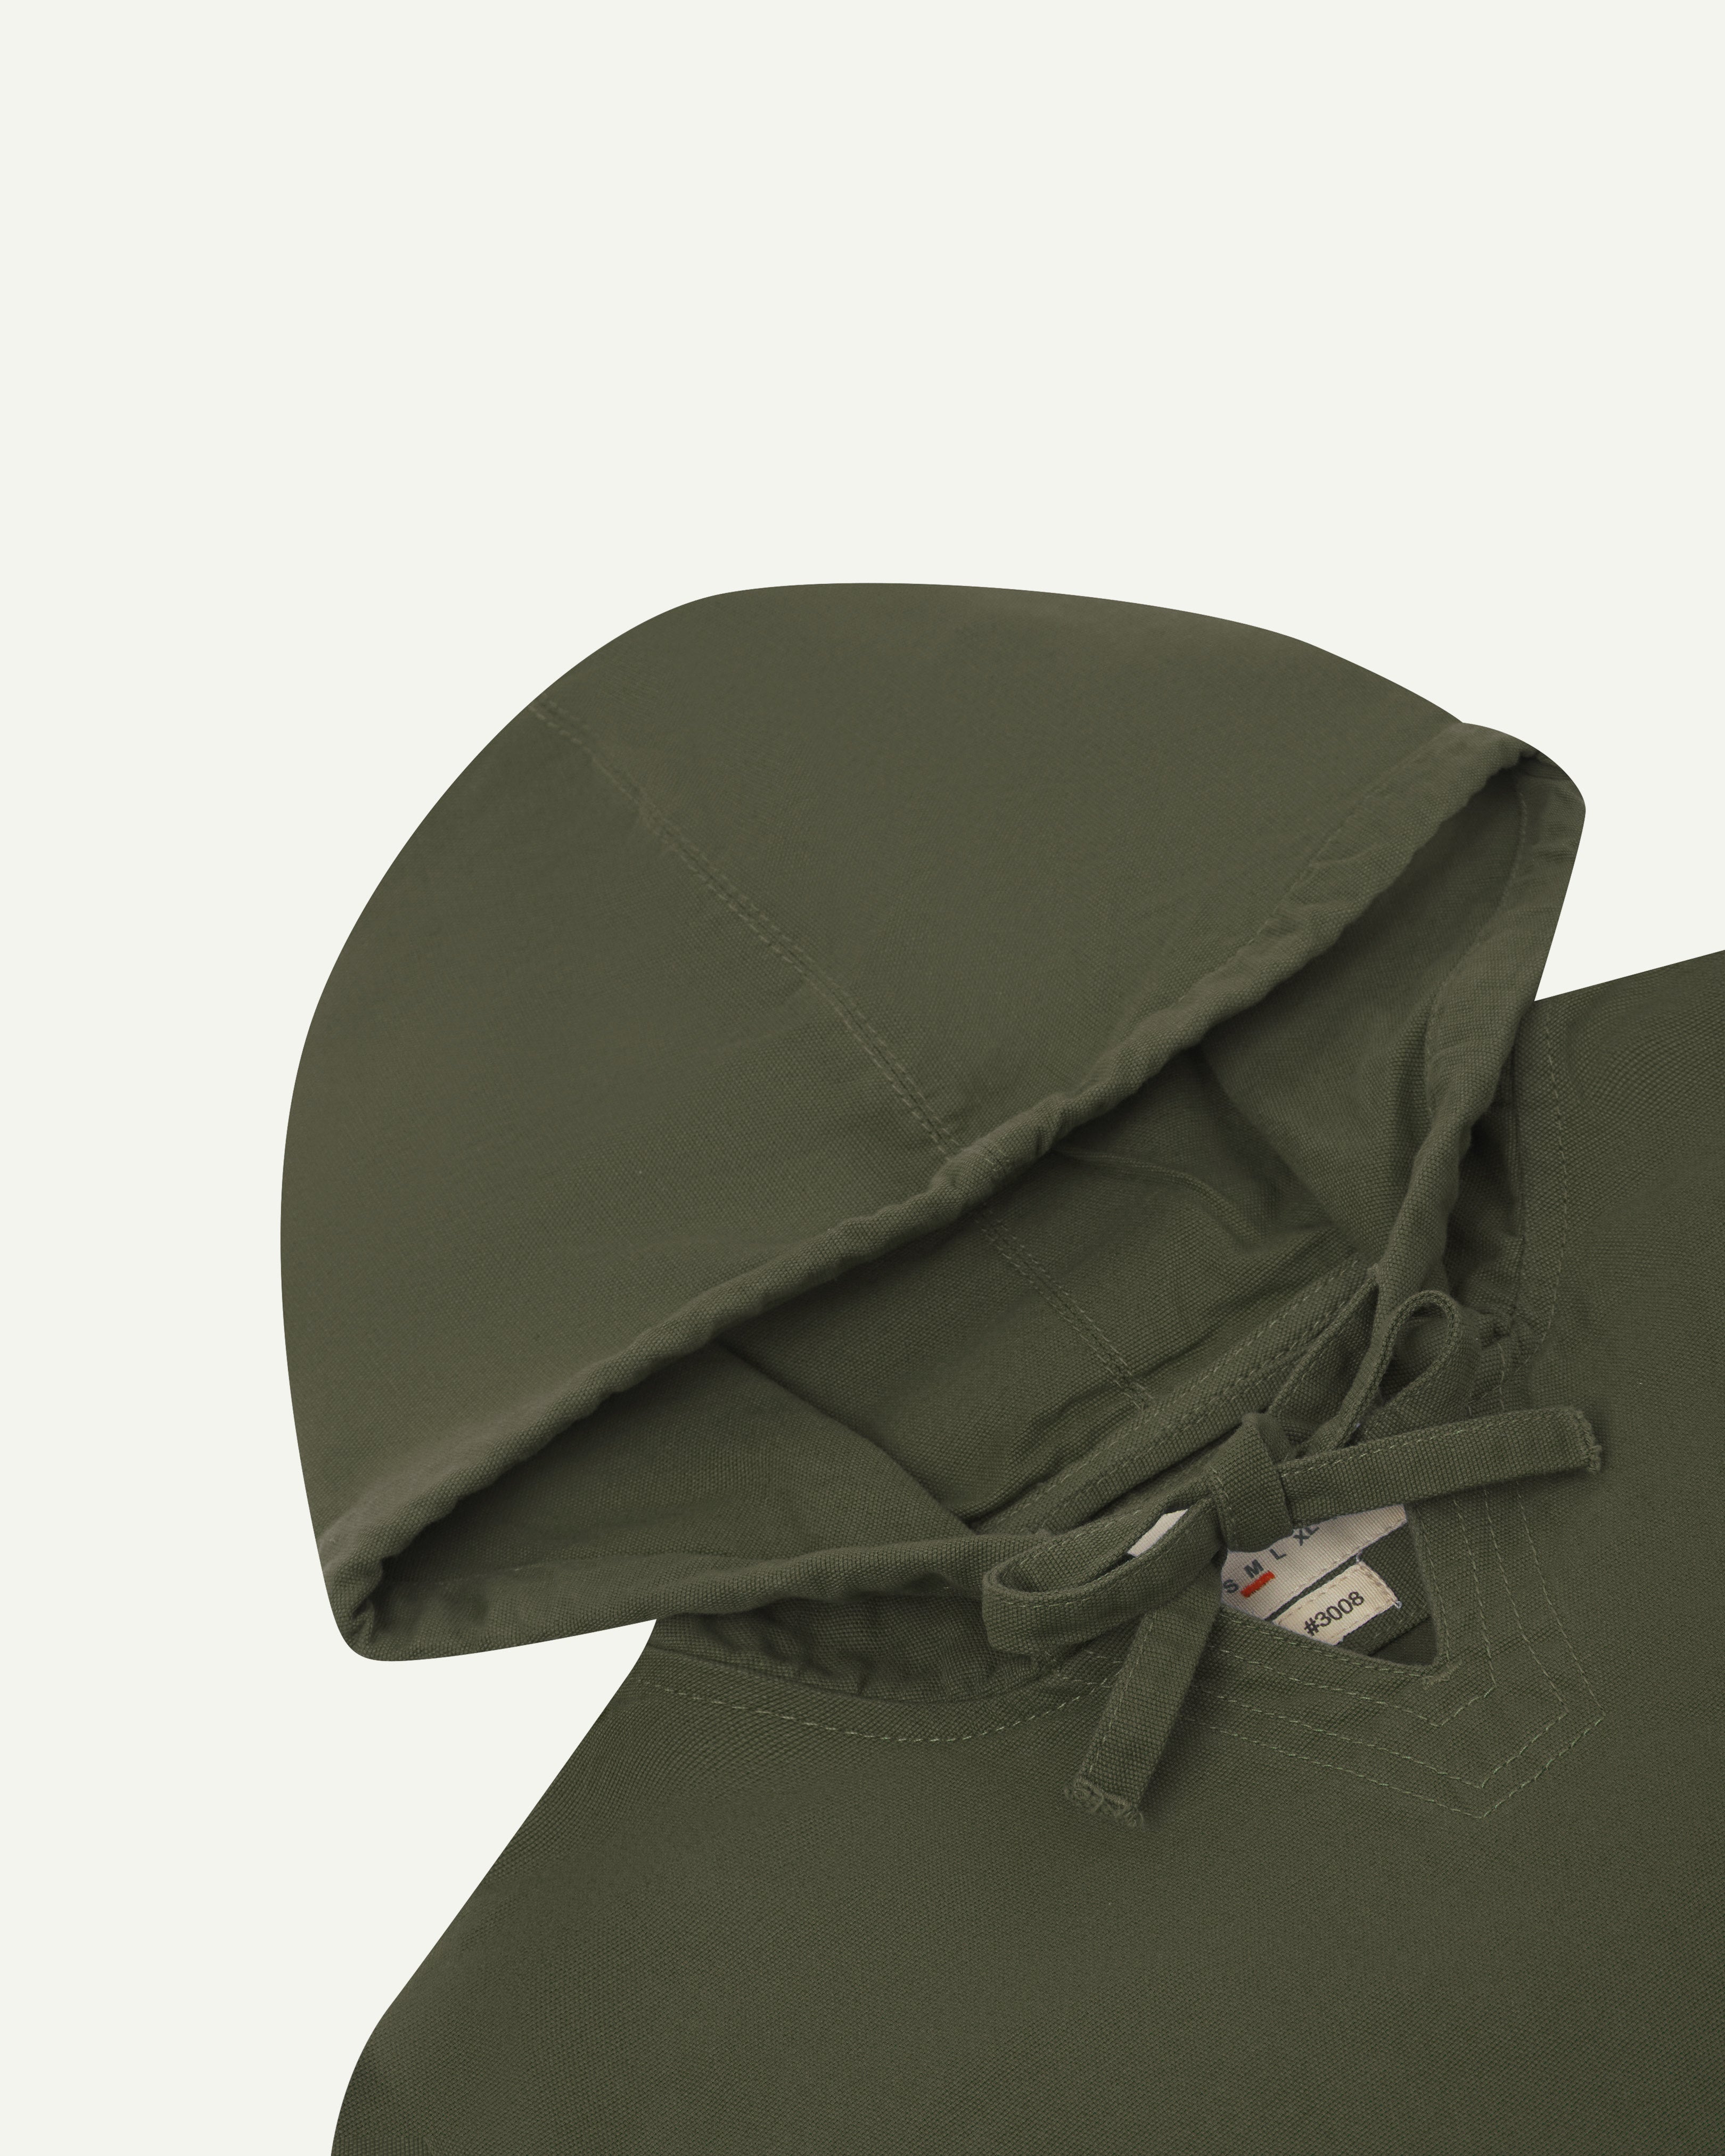 front flat close-up shot of uskees dark green men's organic cotton smock showing hood and ties